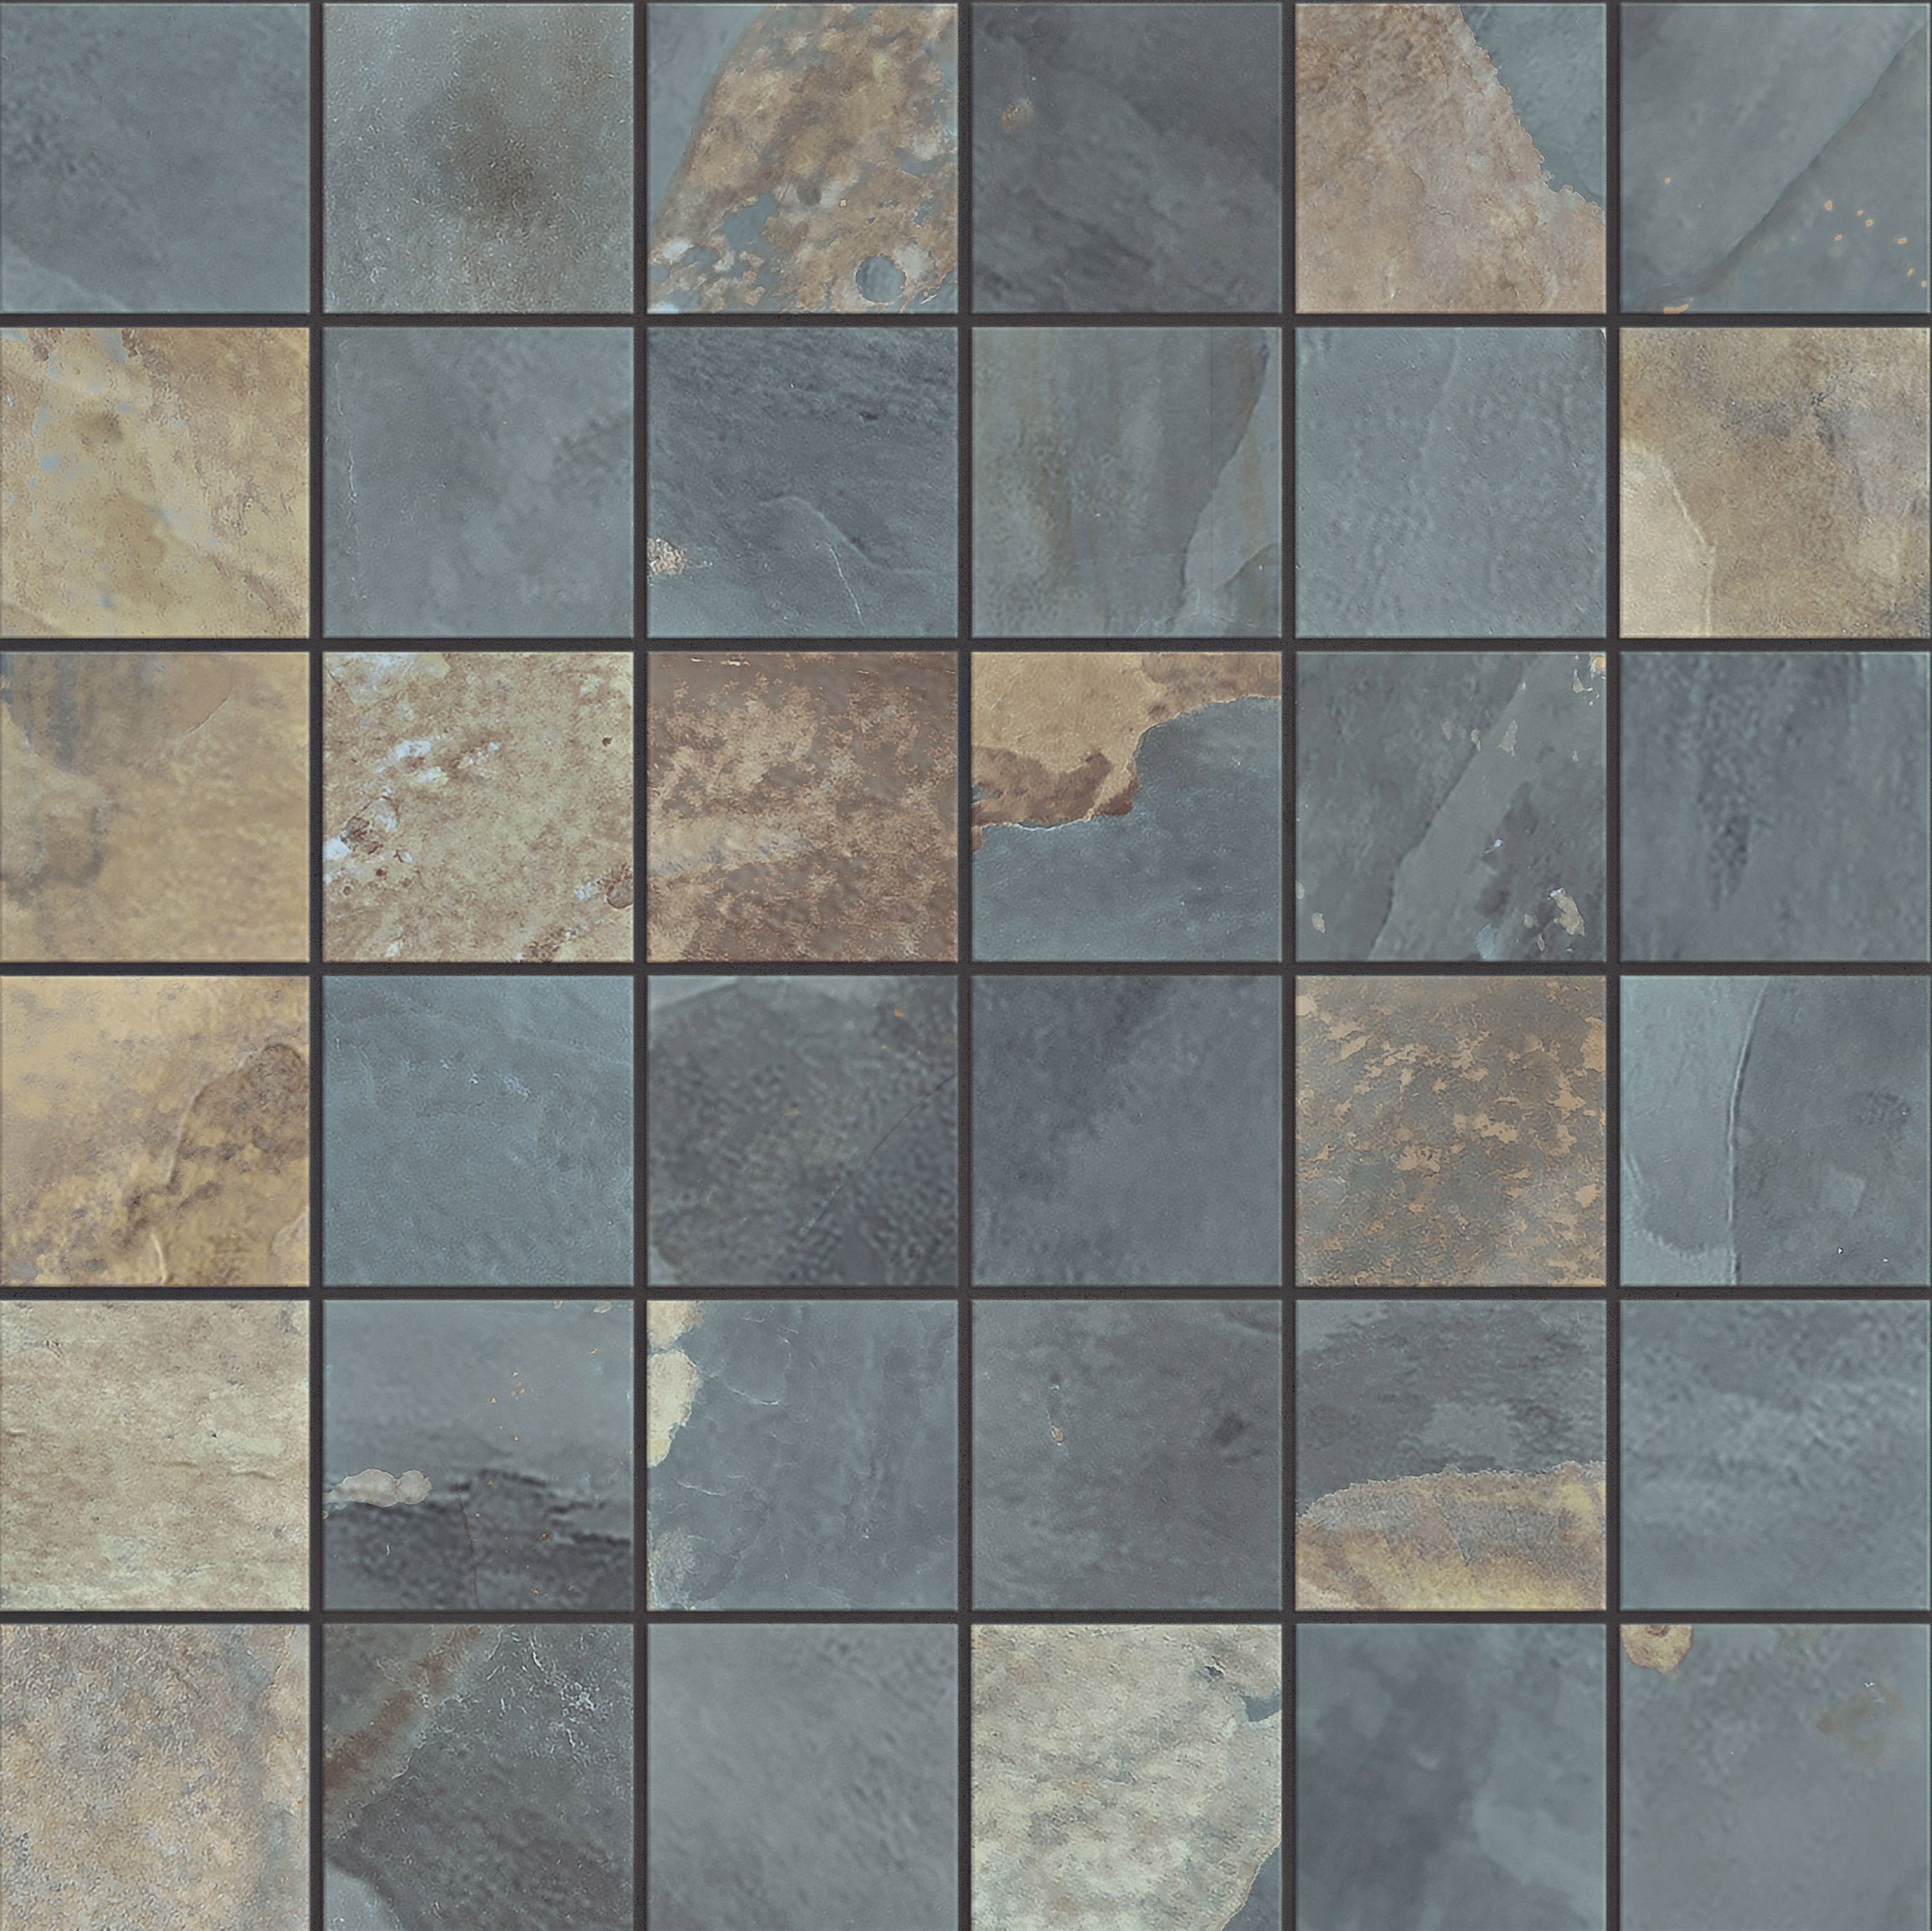 landmark 9mm essence mariposa slate straight stack 2x2 mosaic 12x12x9mm matte rectified porcelain tile distributed by surface group international